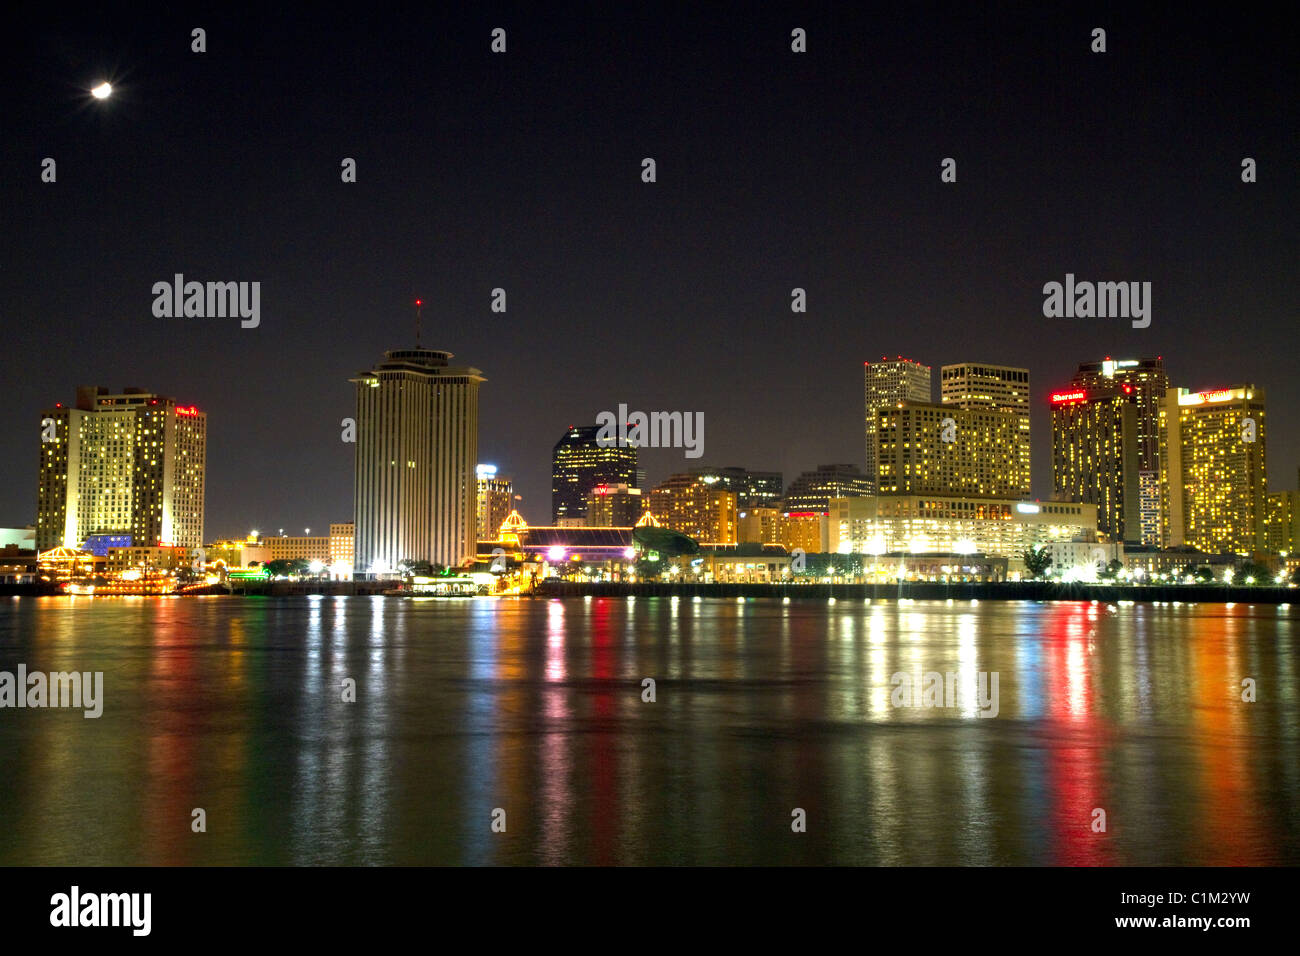 Night skyline of the city of New Orleans along the Mississippi River, Louisiana, USA. Stock Photo